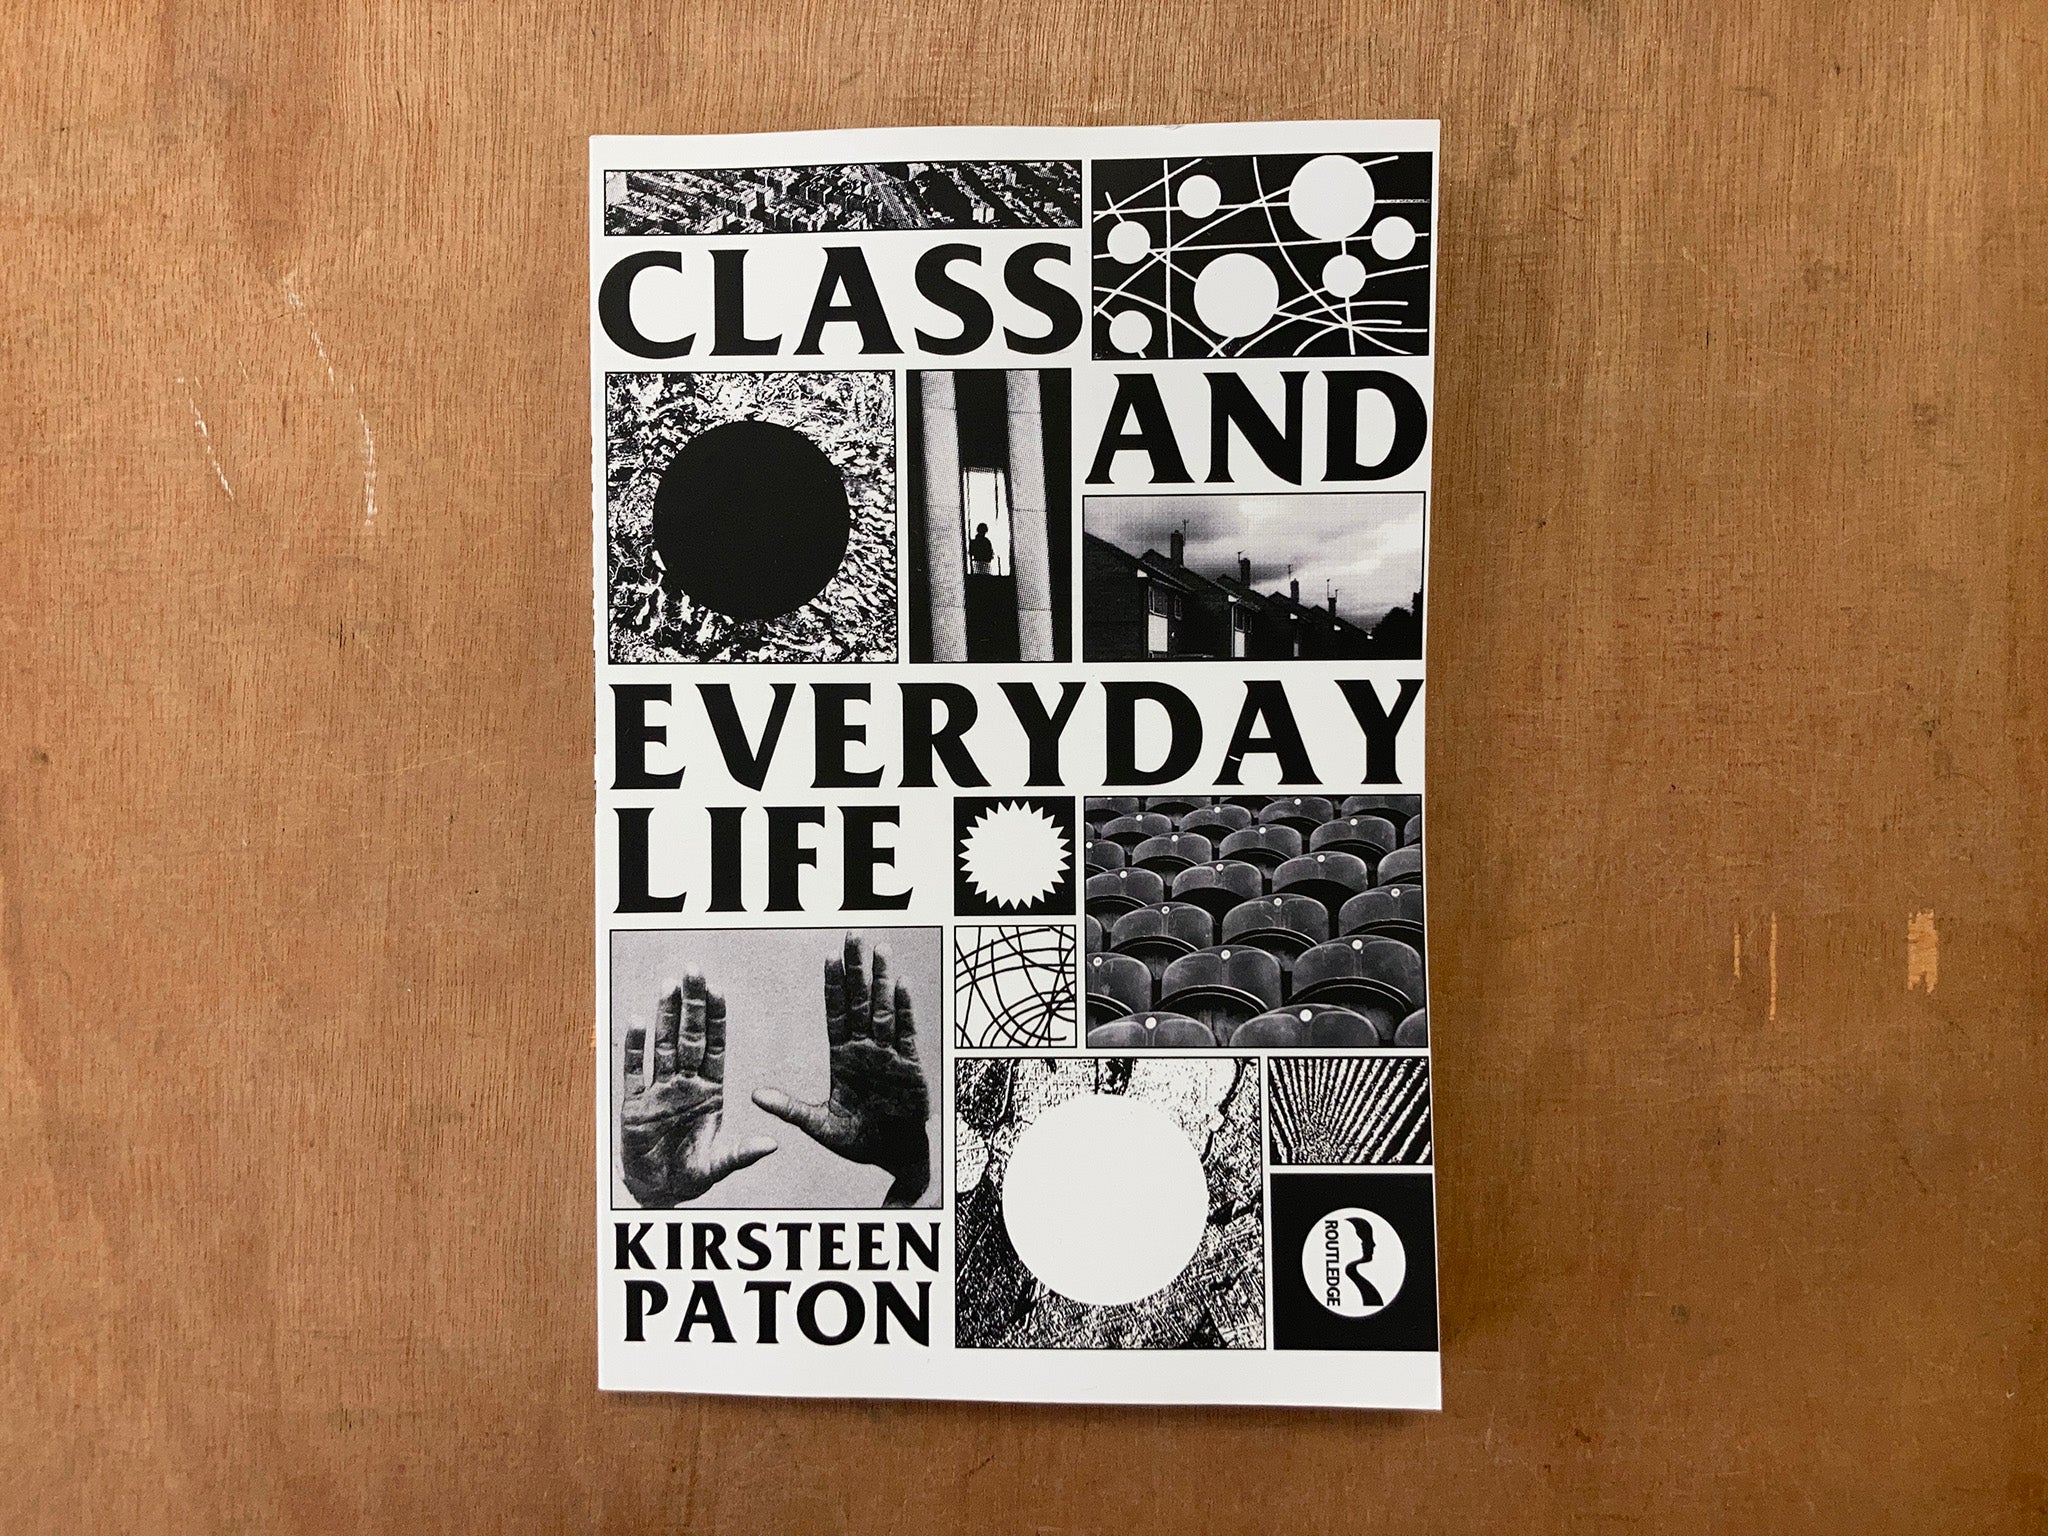 CLASS AND EVERYDAY LIFE by Kirsteen Paton